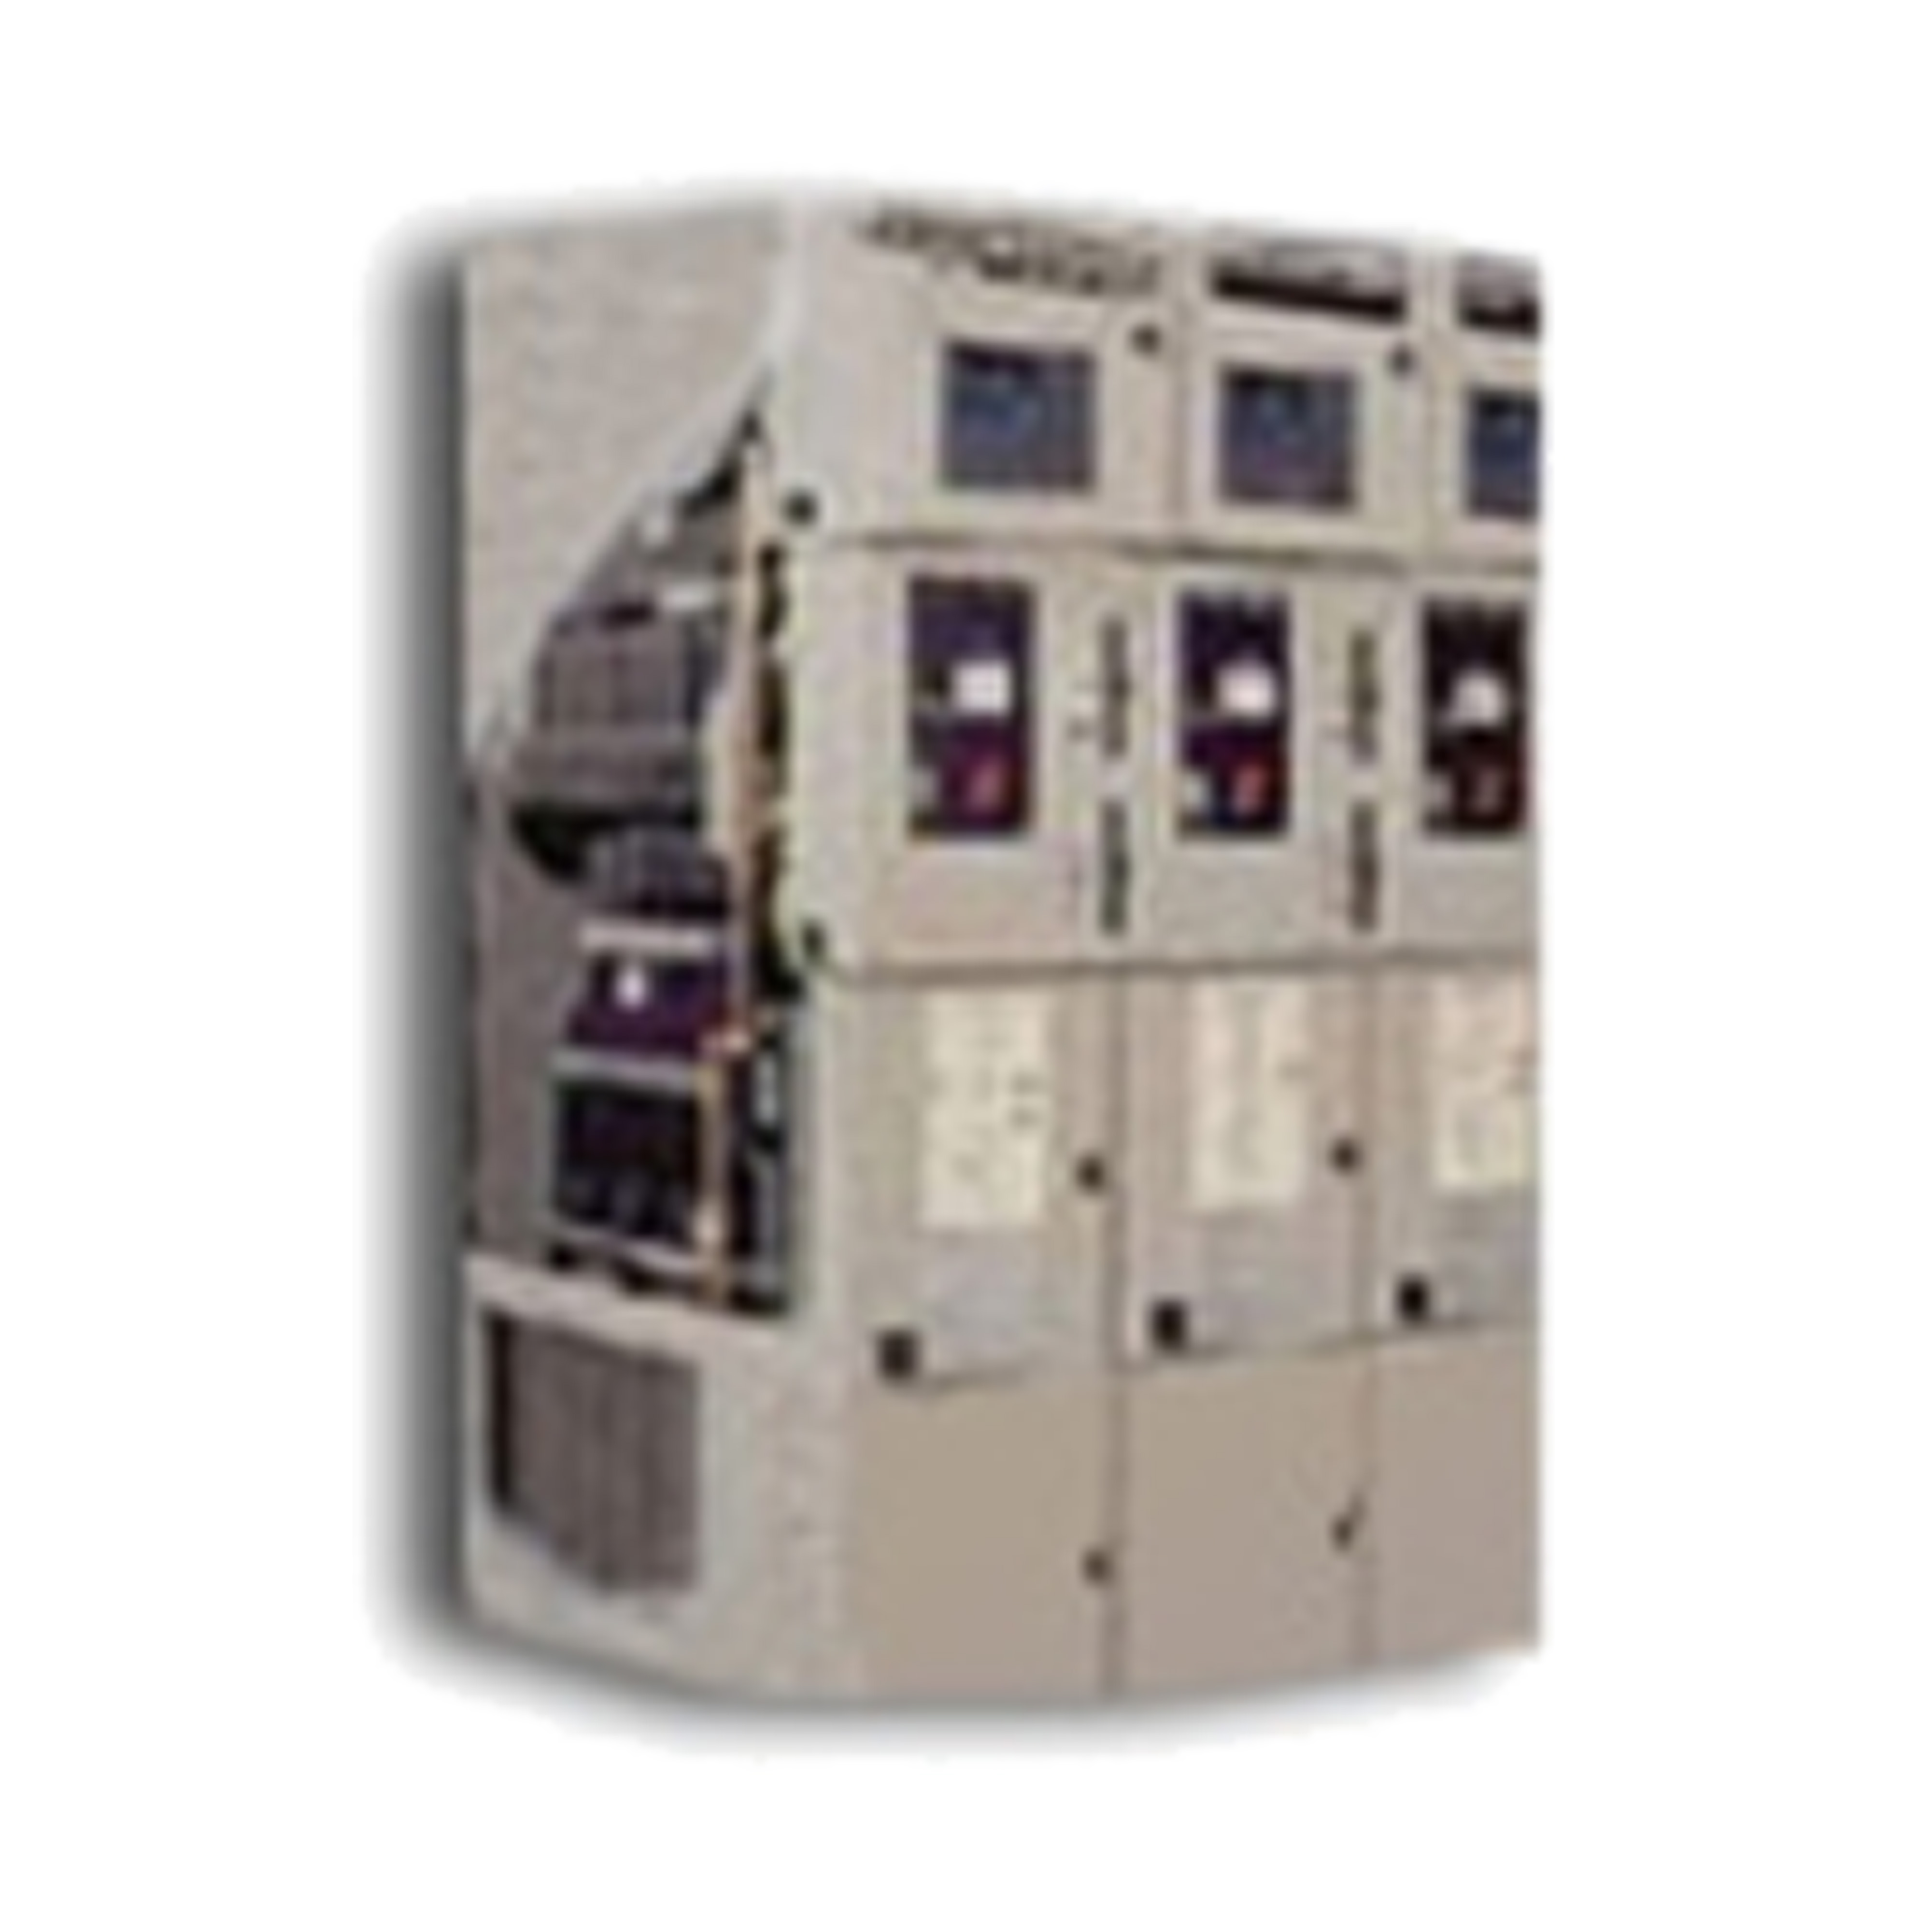 GM6 Schneider Electric Gas-Insulated Primary Switchboard up to 40.5 kV